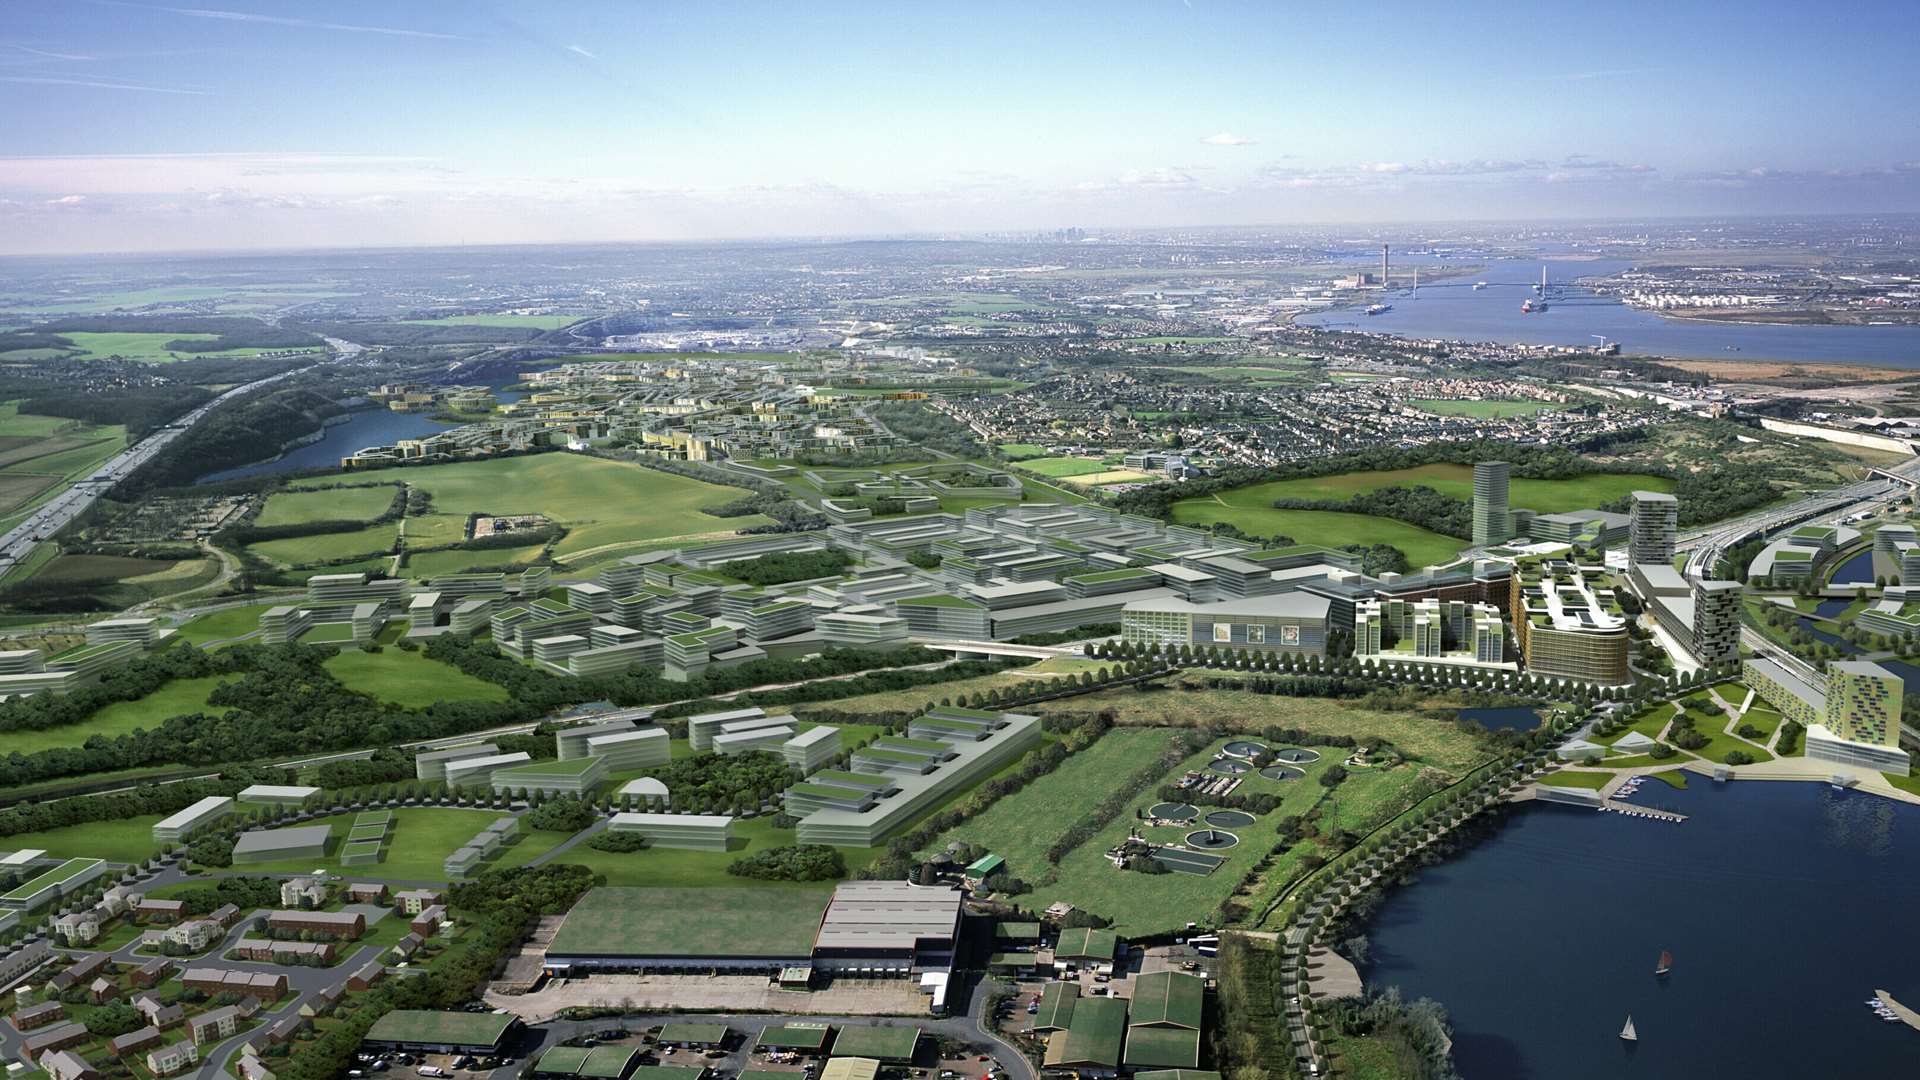 Developer Land Securities' former vision for a new town at Ebbsfleet